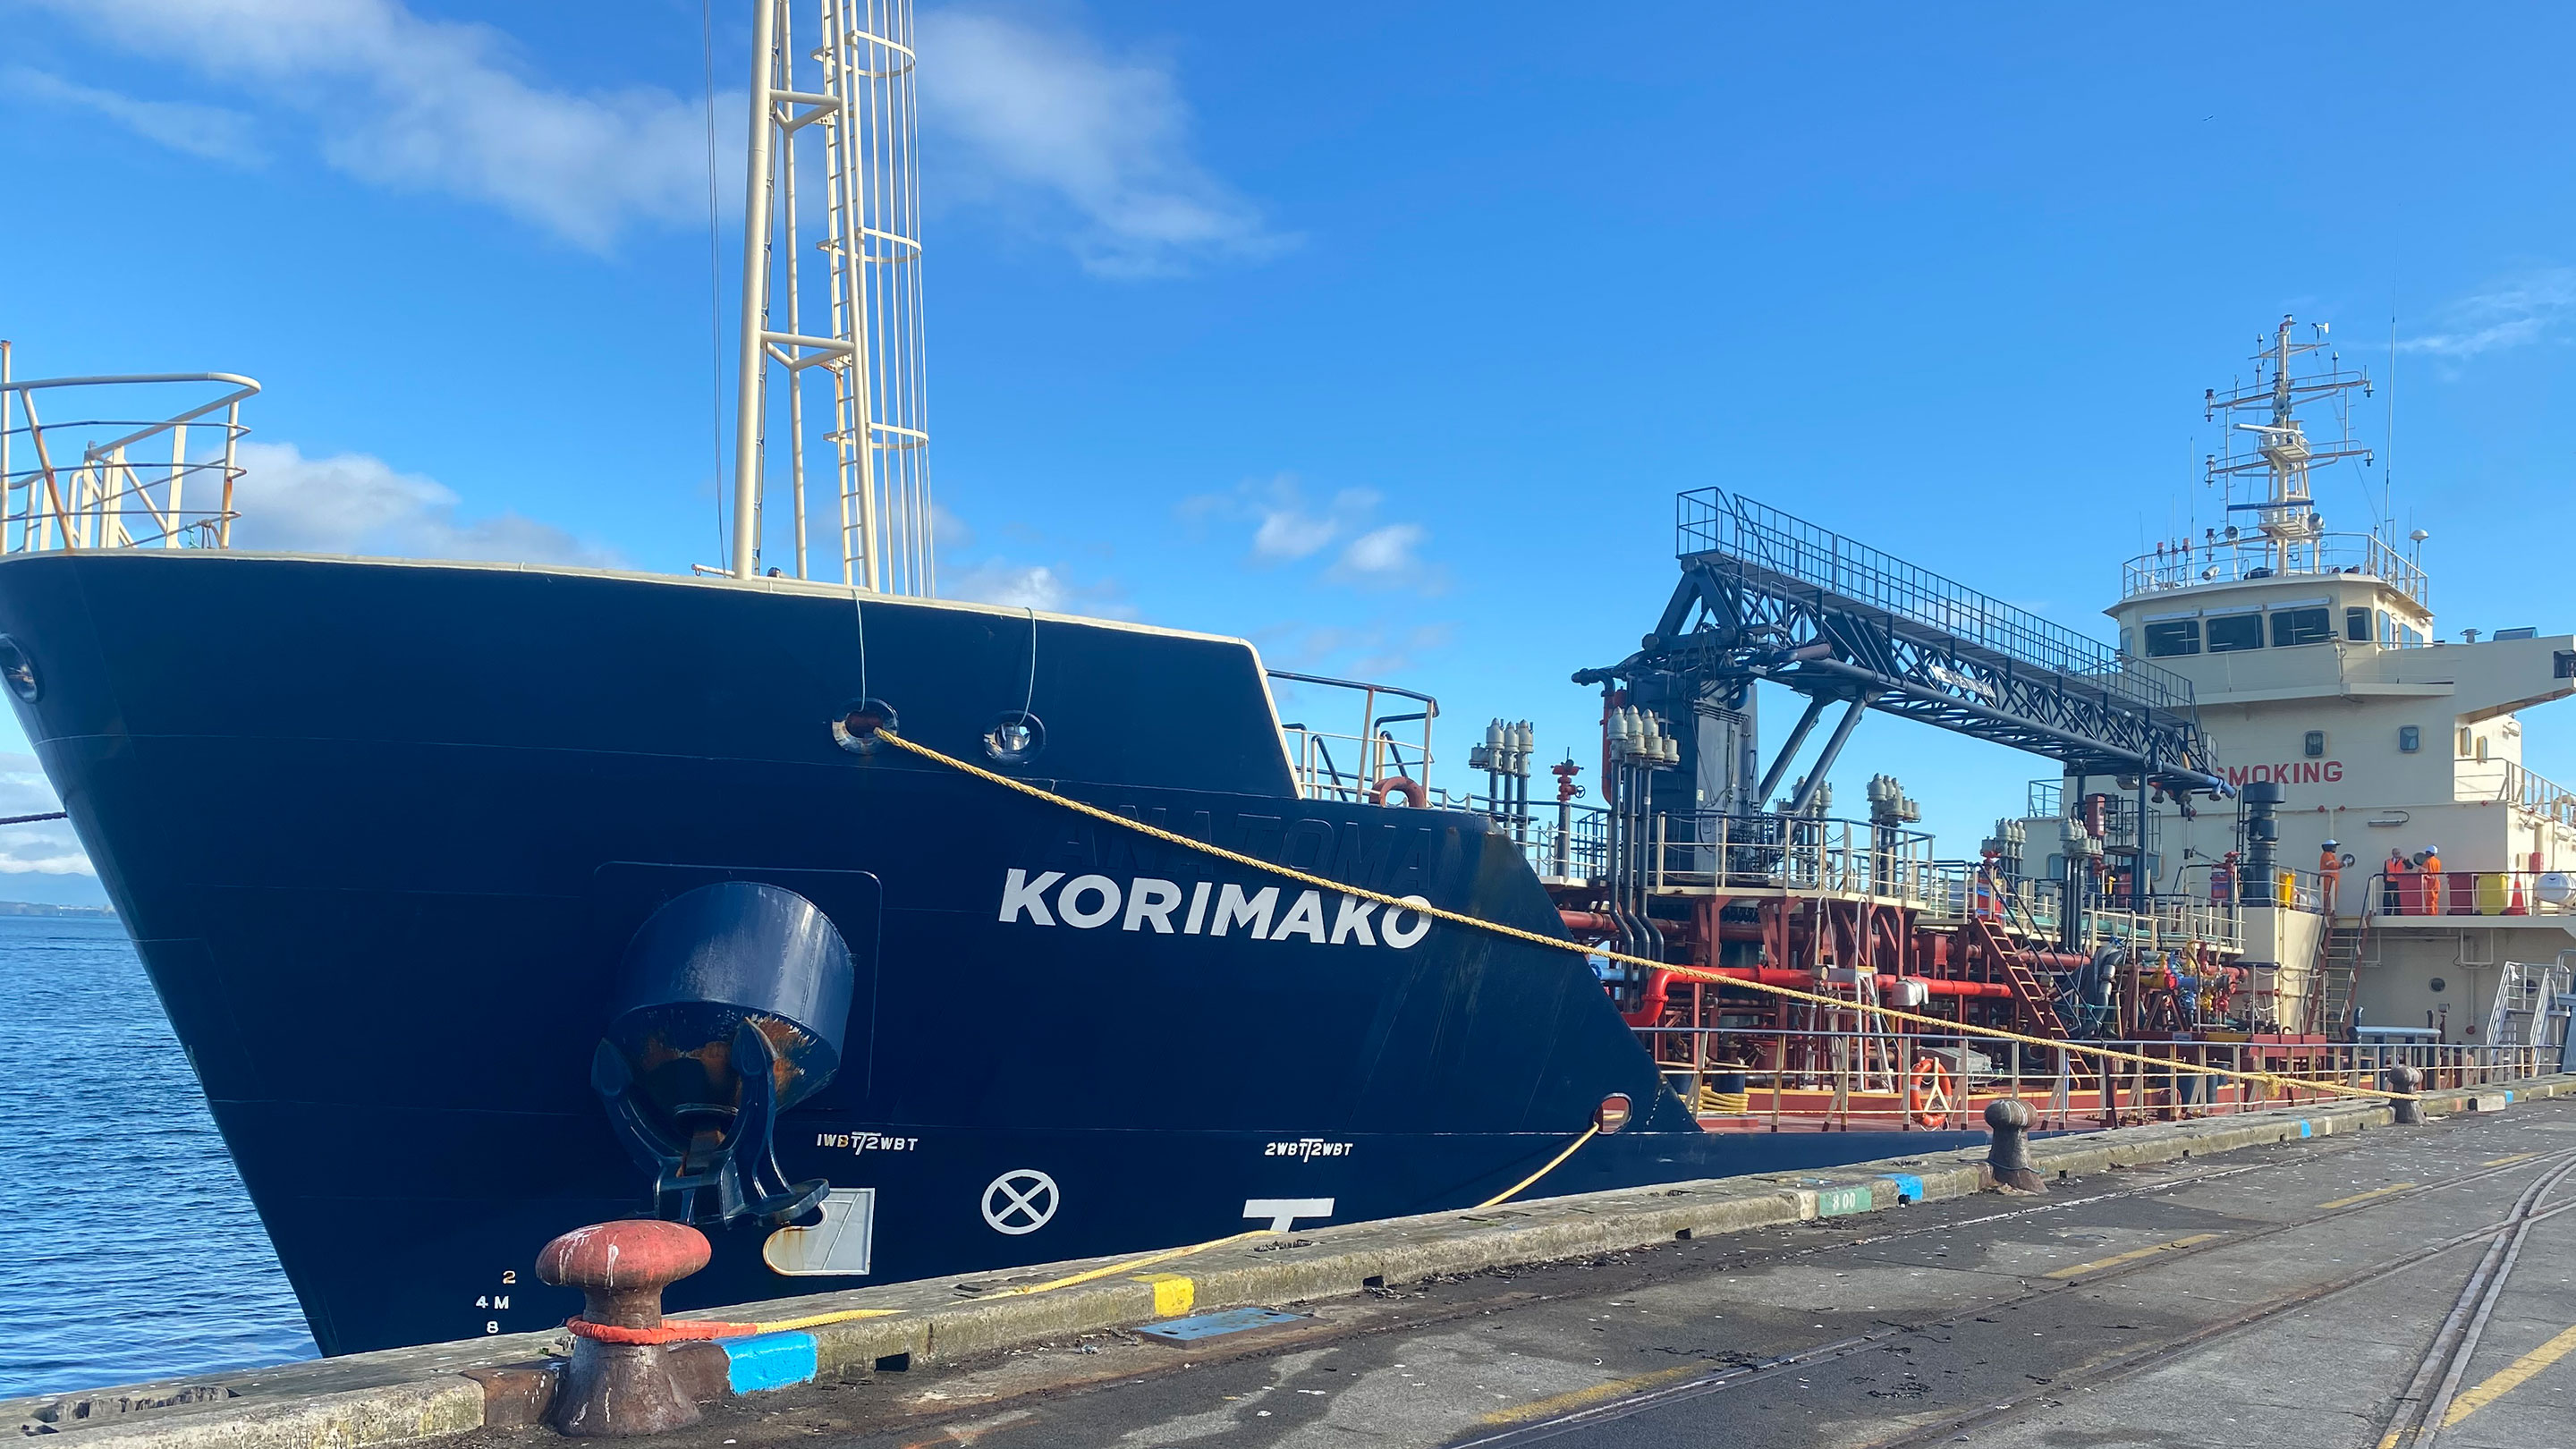 Image The MT Korimako will help to increase the efficiency of refuelling operations at Port of Tauranga for Mobil marine fuels customers.